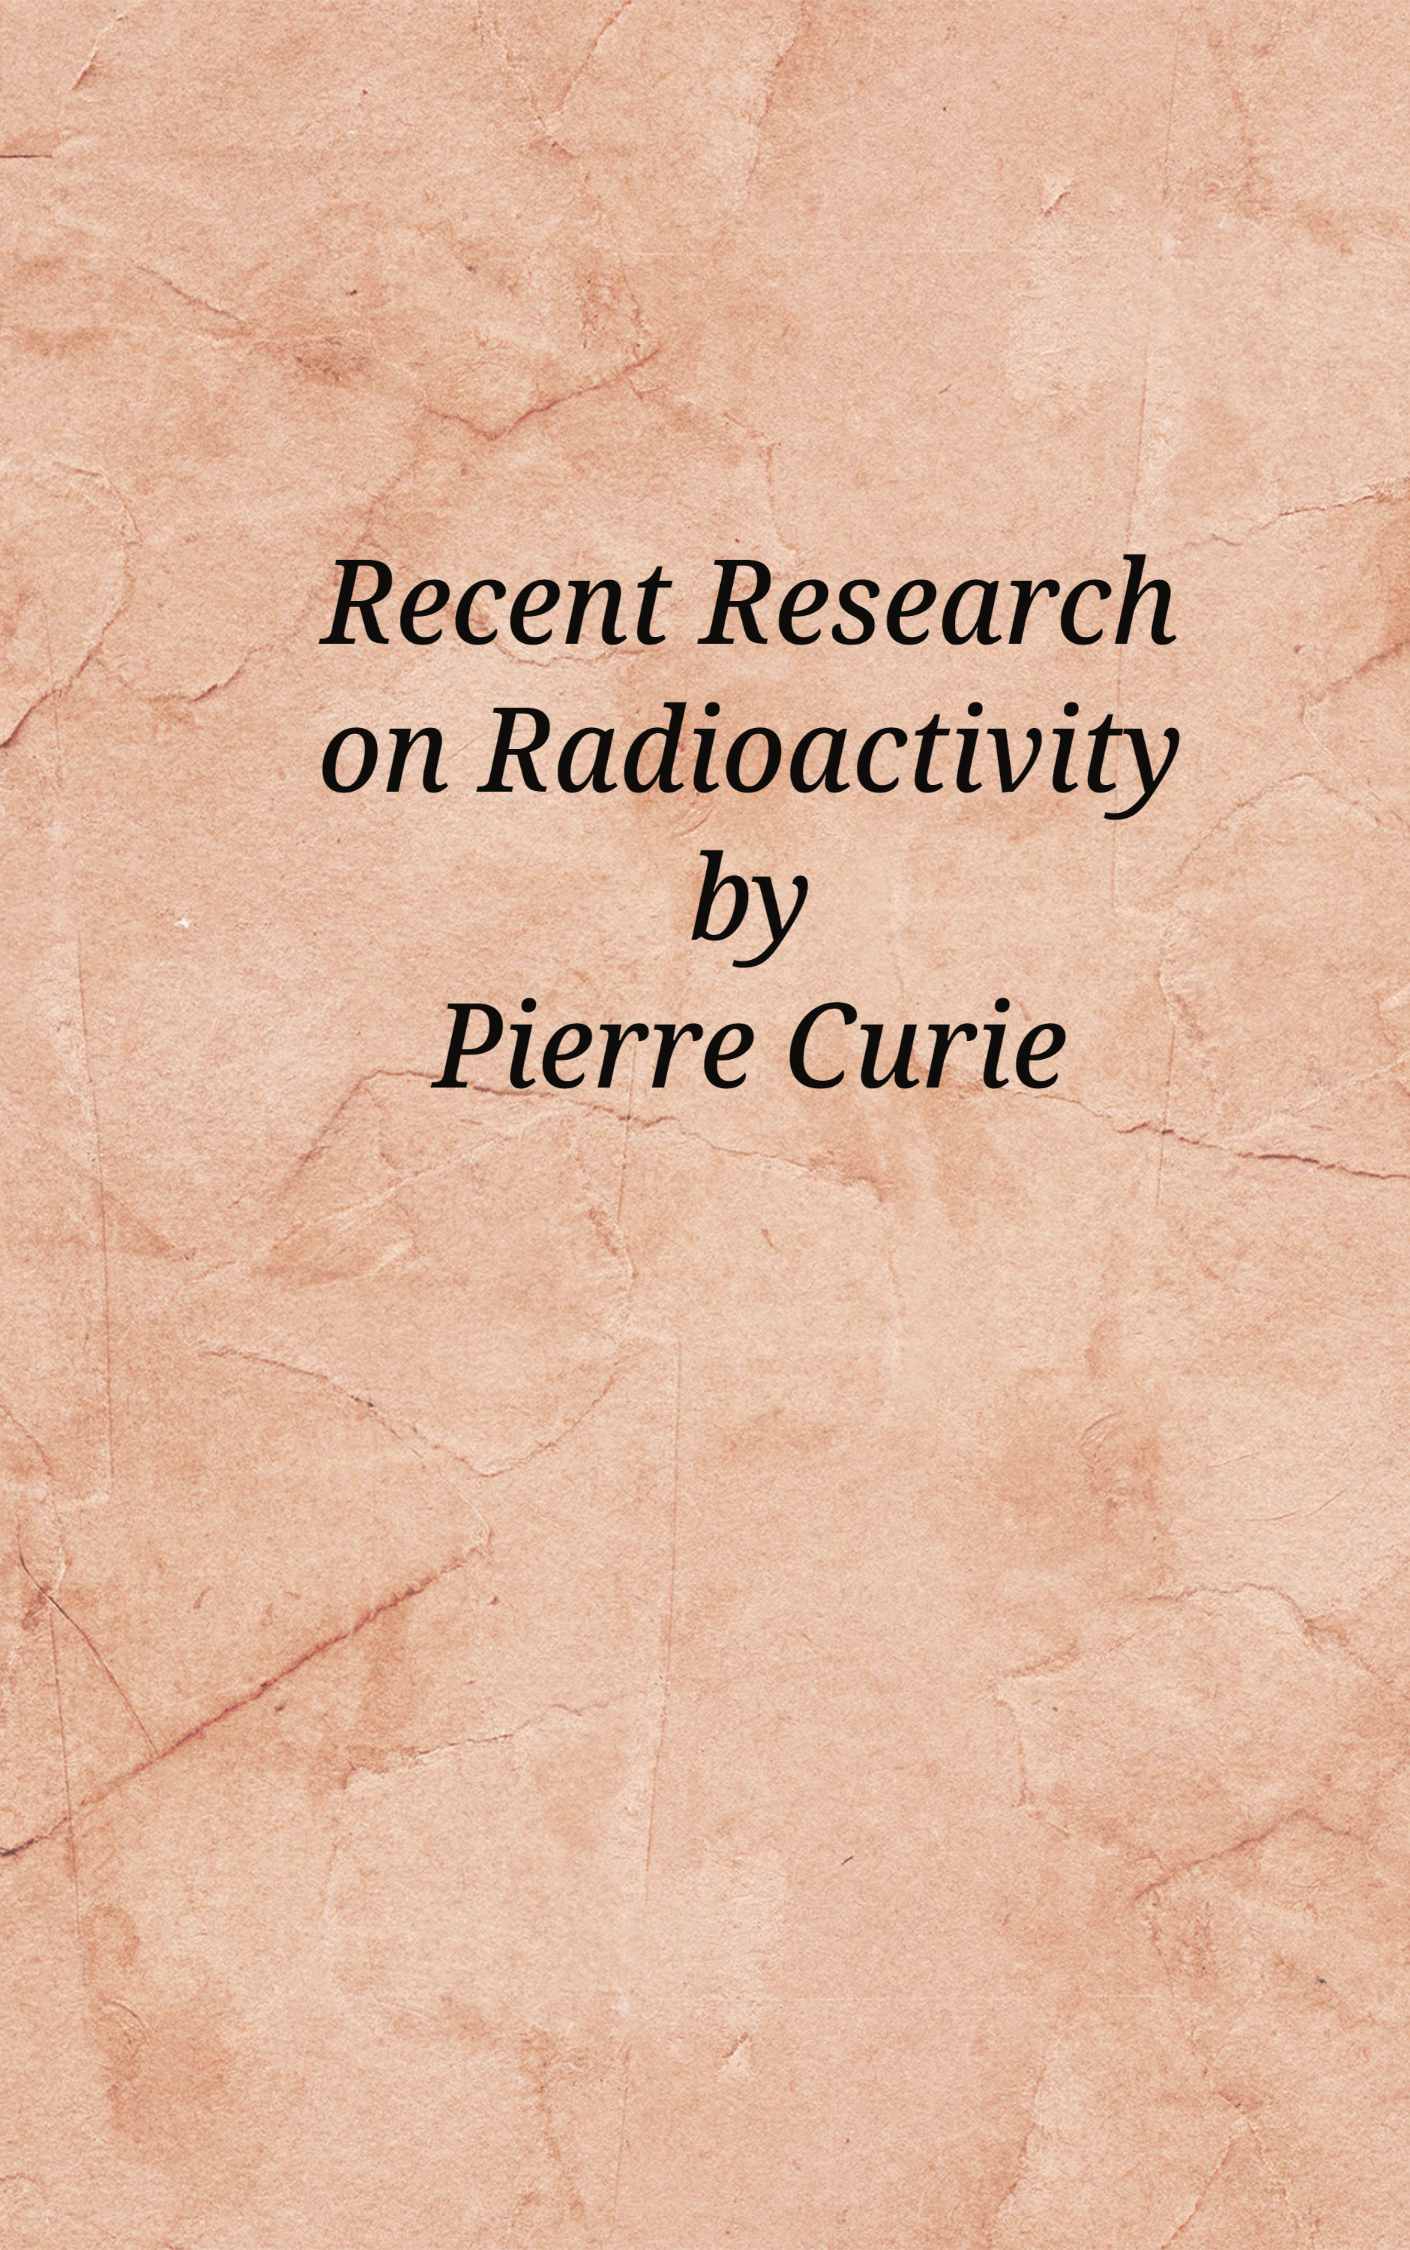 Recent research on radioactivity